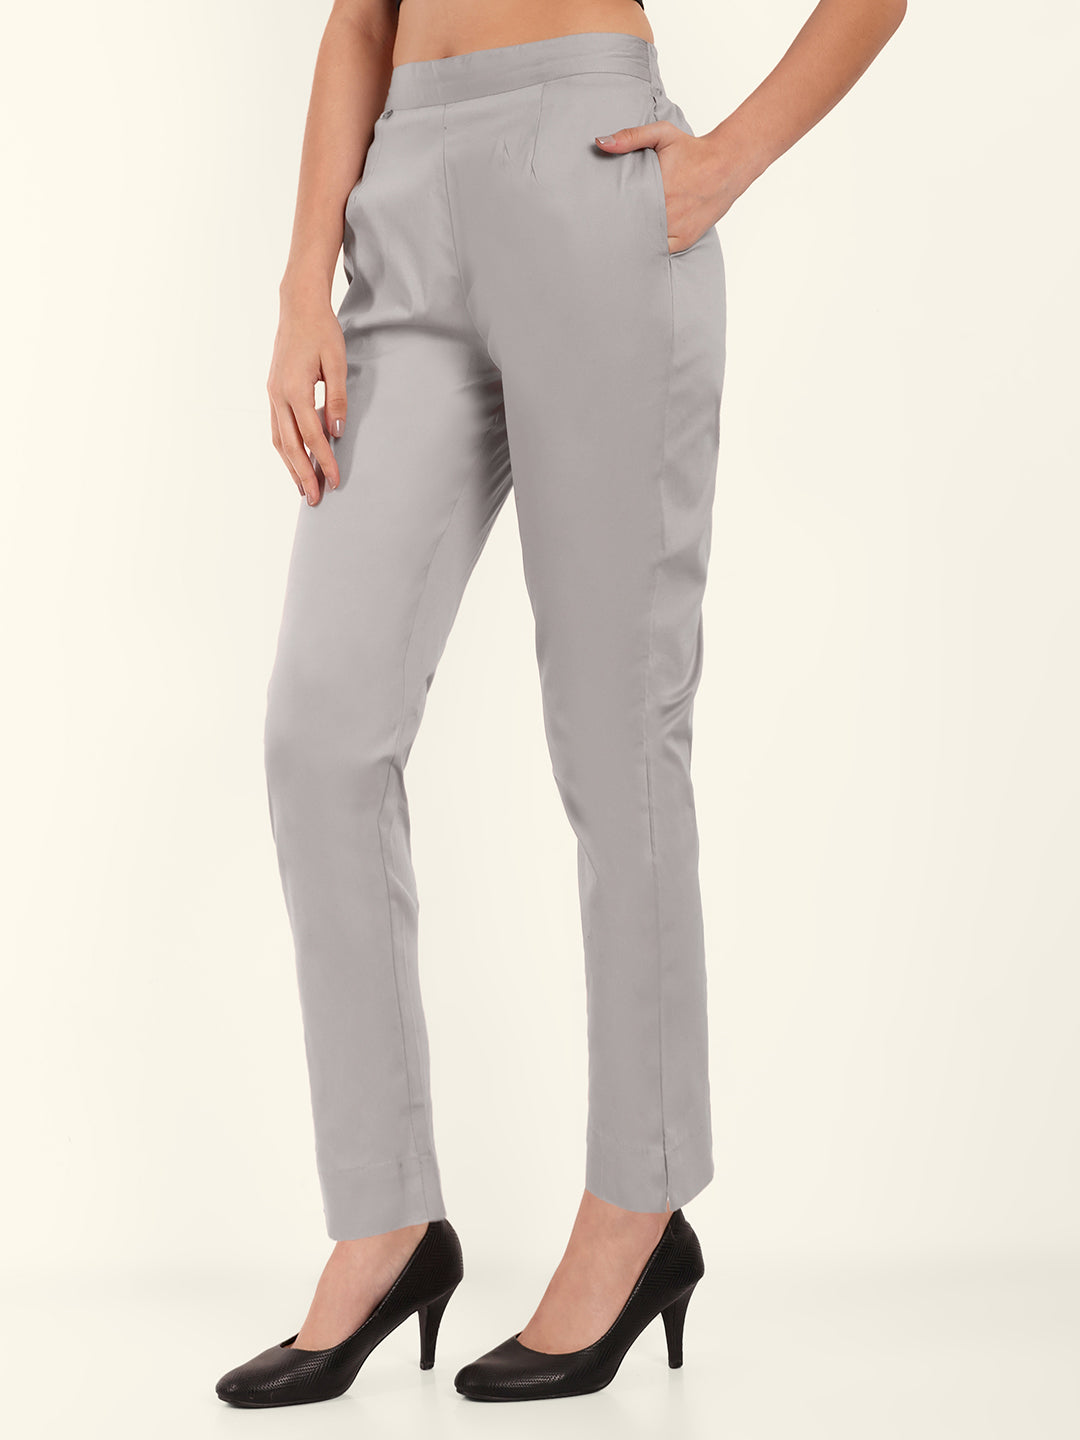 Naariy Stretchable Cotton Pants for Women  Everyday Wear